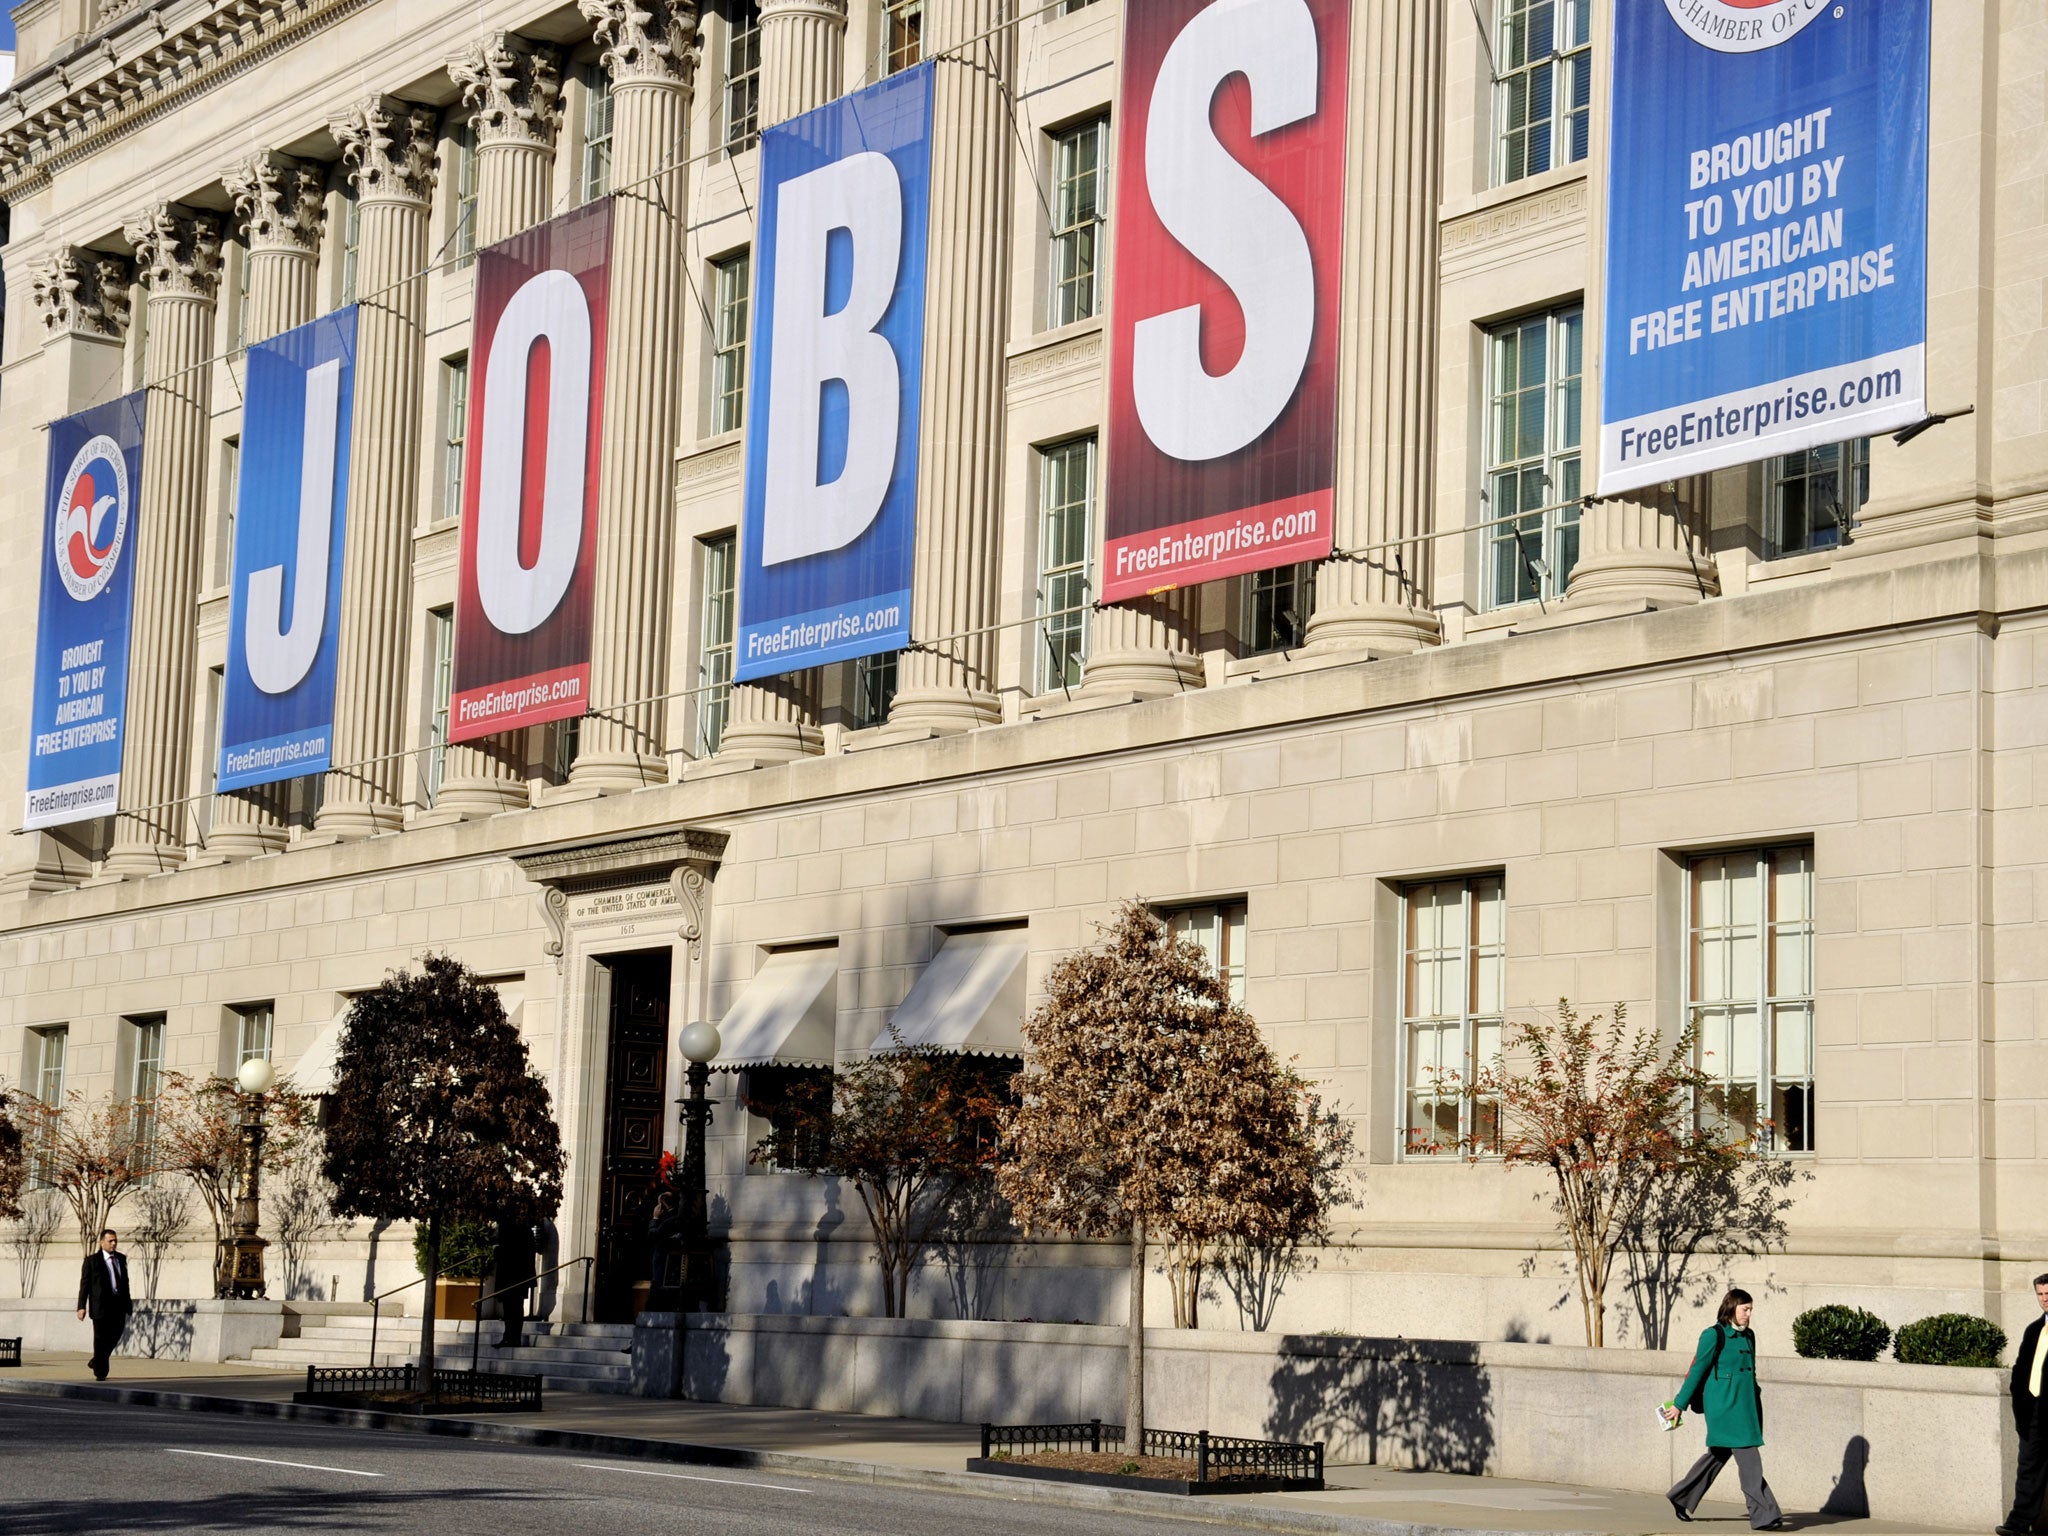 A jobs sign hangs above the entrance to the US Chamber of Commerce building in Washington, DC